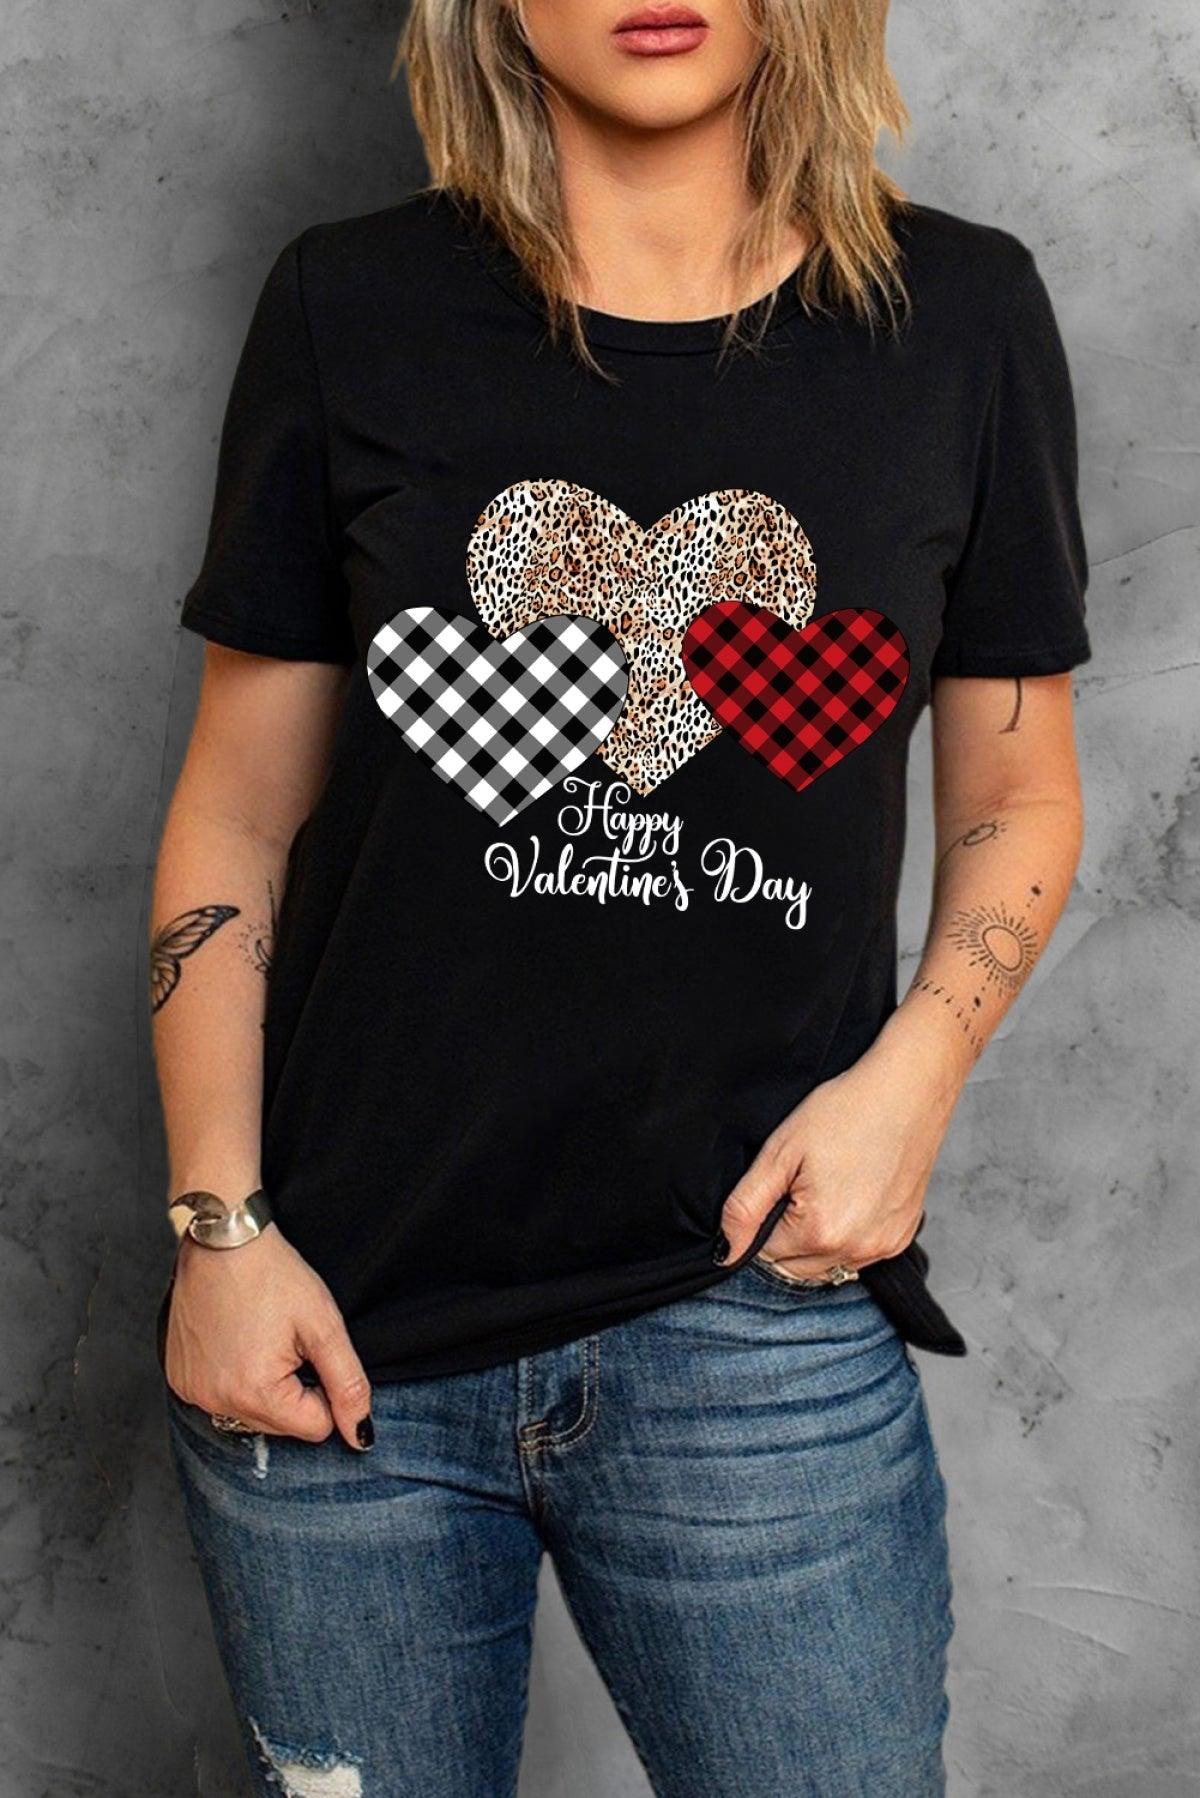 Black Happy Valentine's Day Hearts Print Short Sleeve T Shirt - That’s So Fletch Boutique 